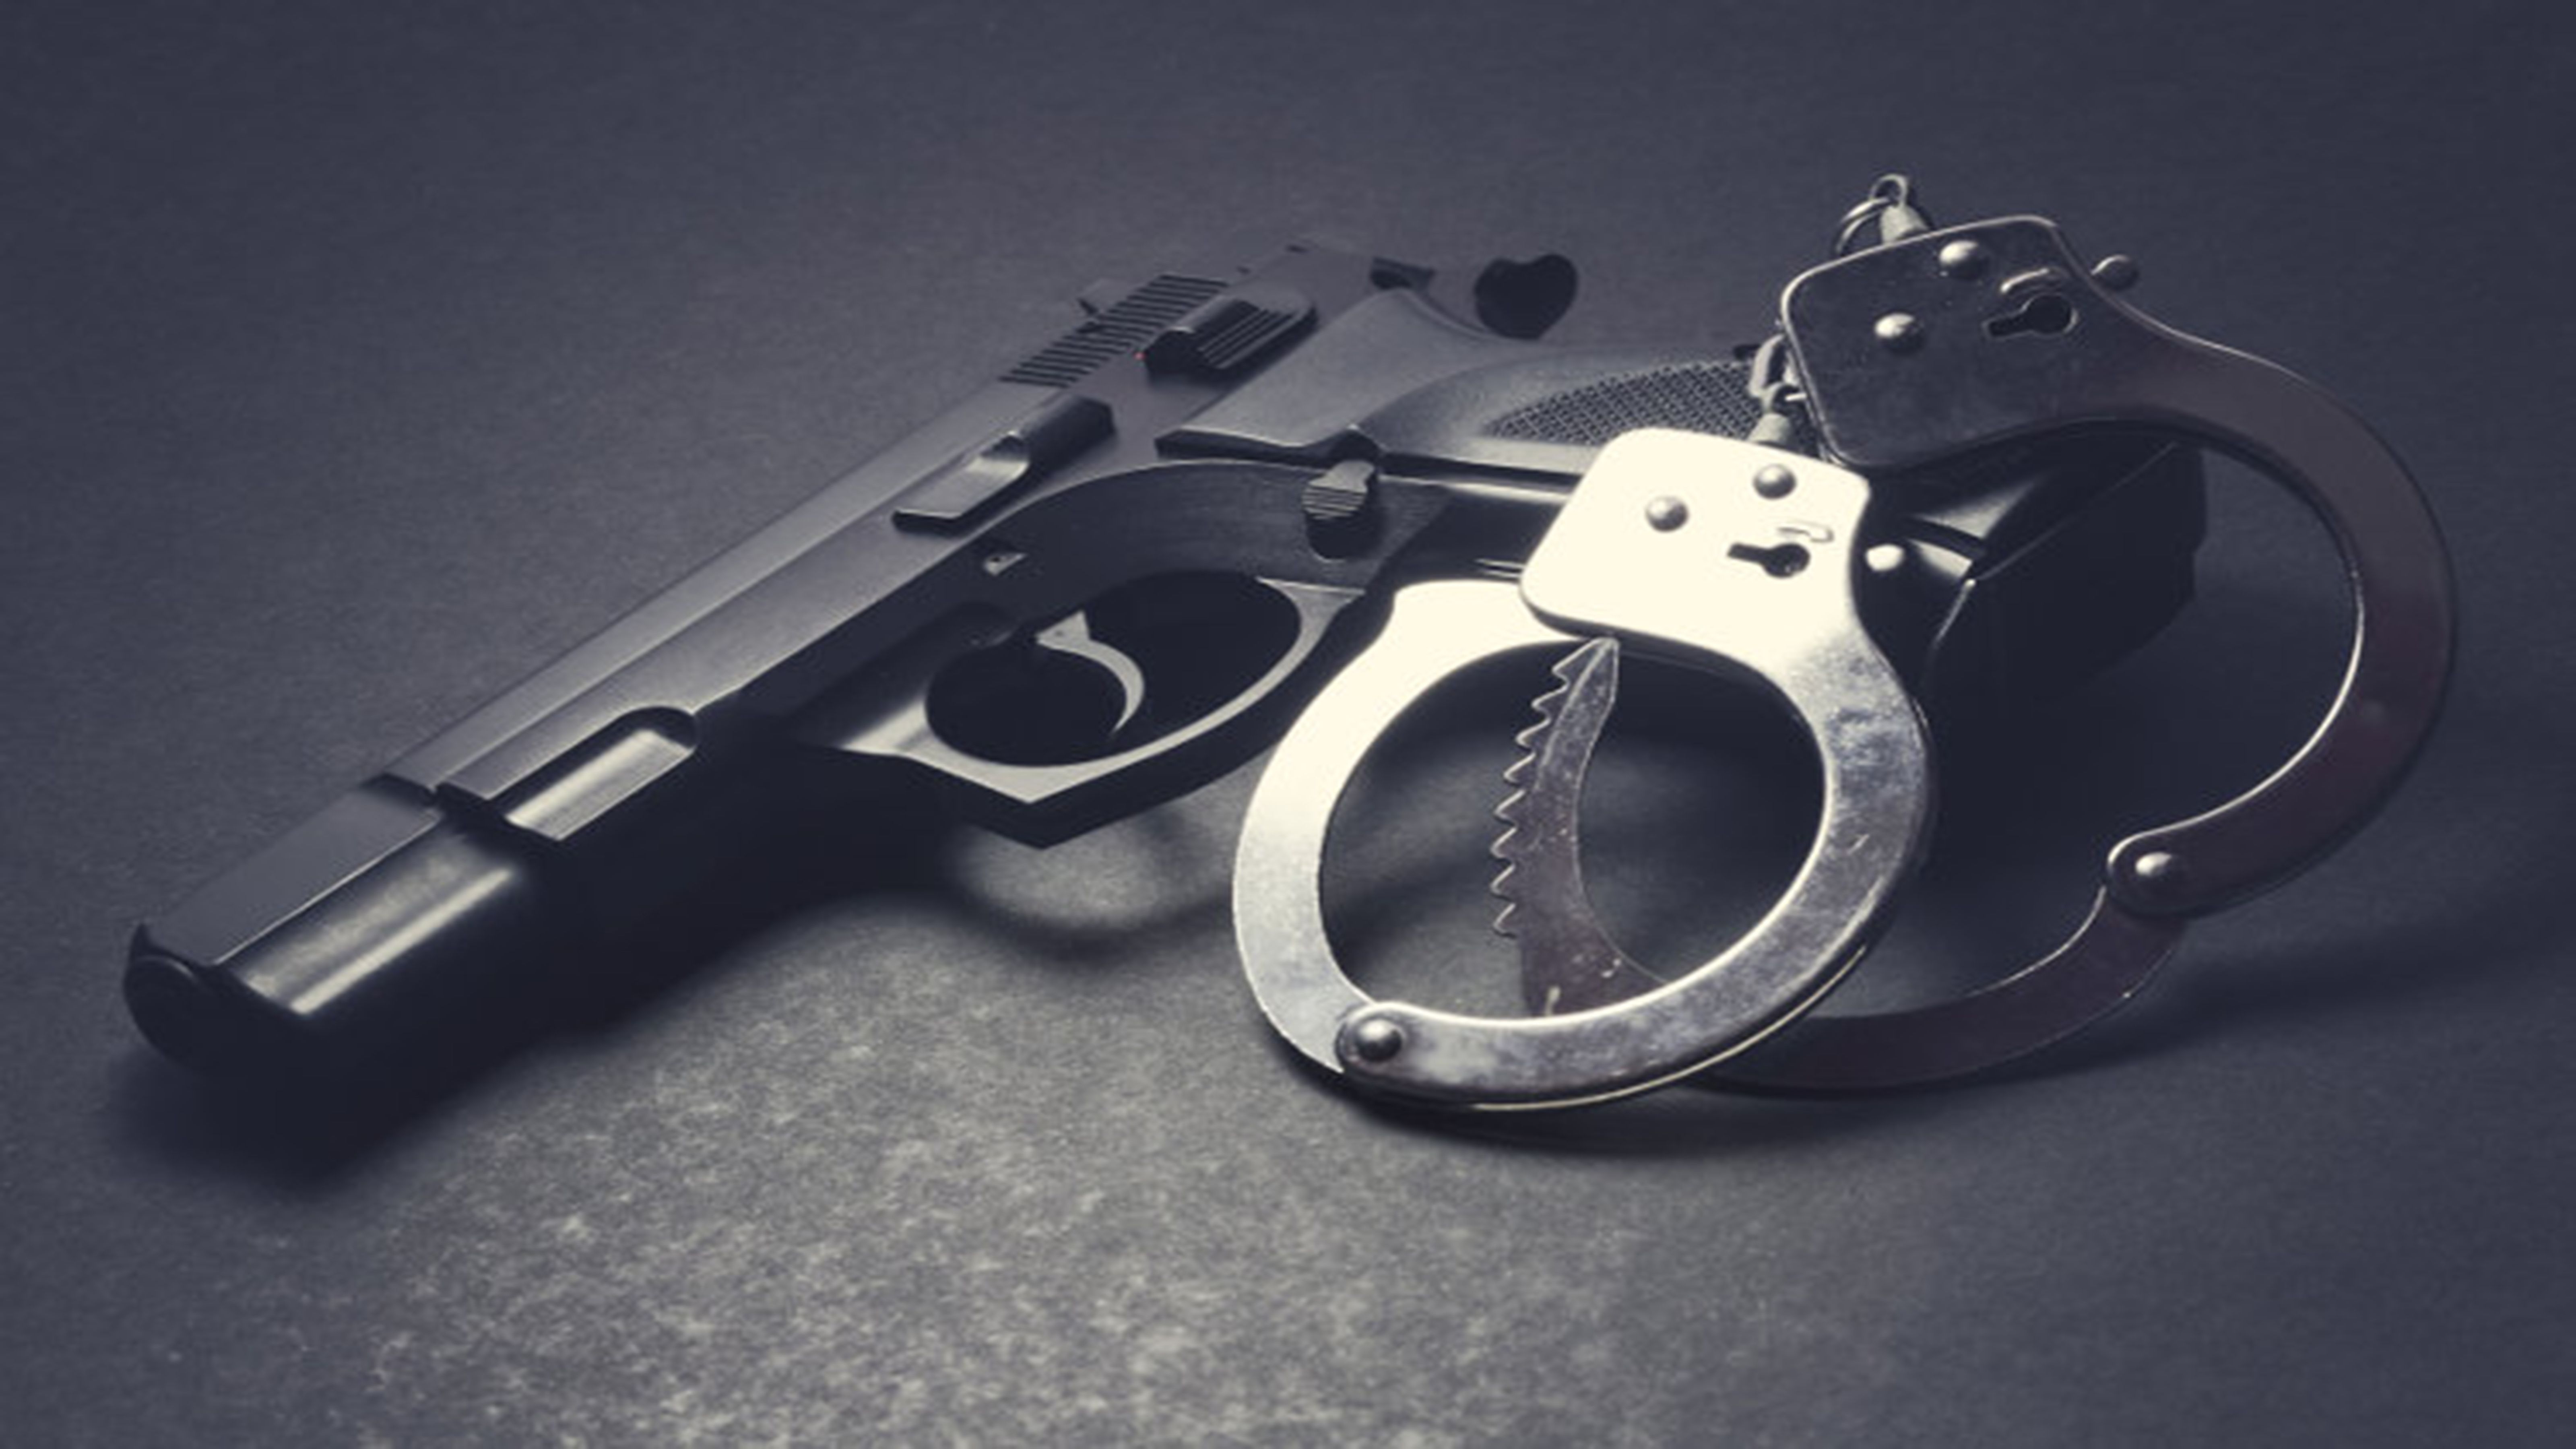 5 nabbed for illegal possession of firearms in Quezon